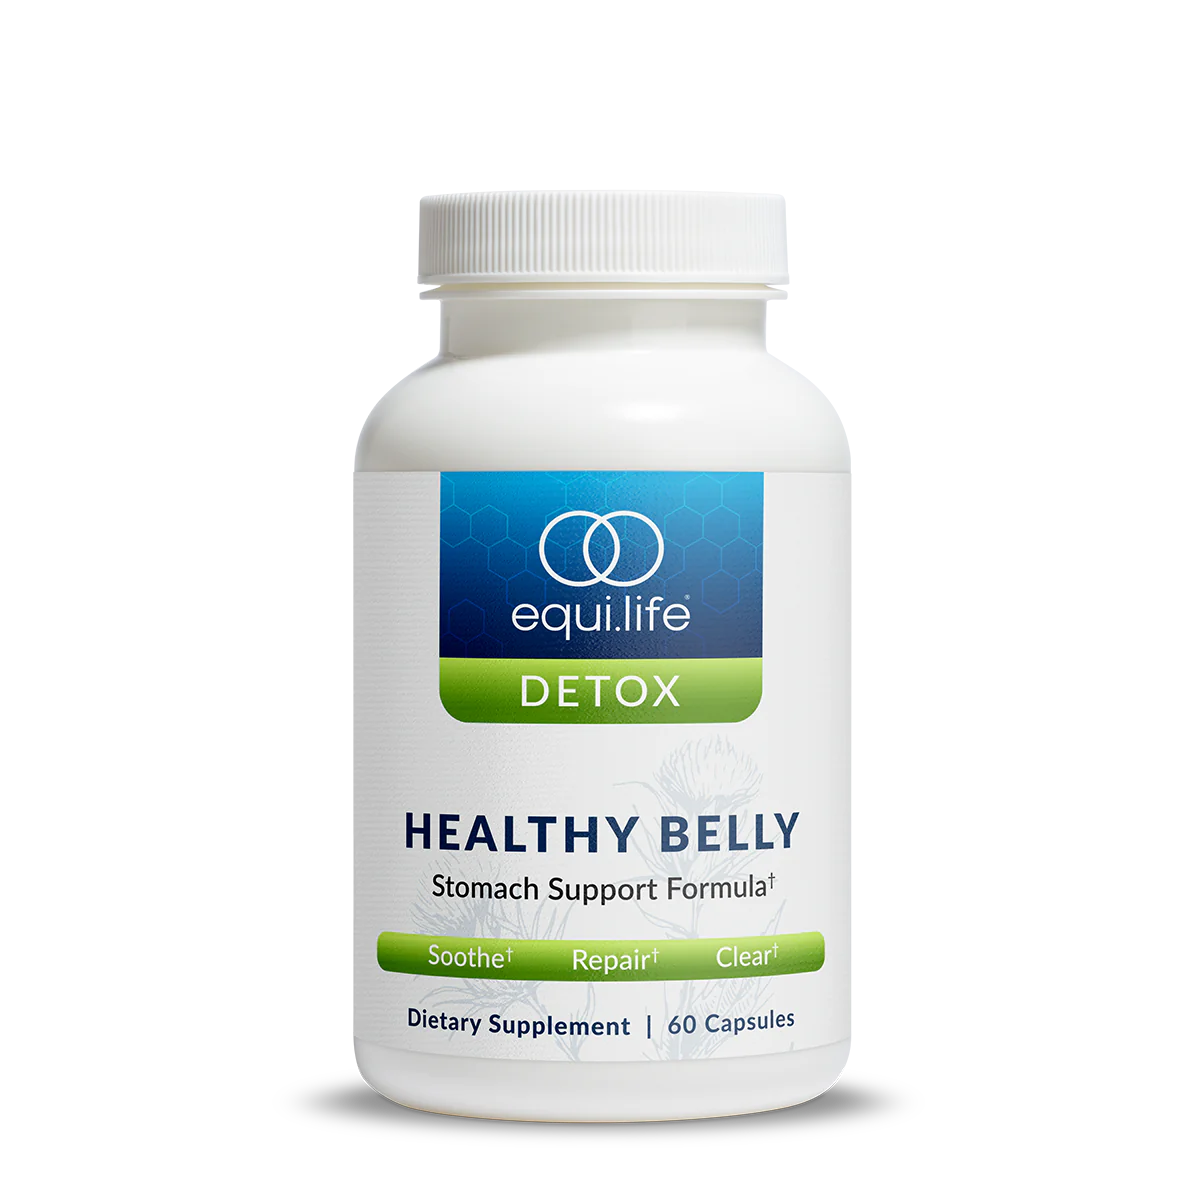 Healthy Belly by Equi.life